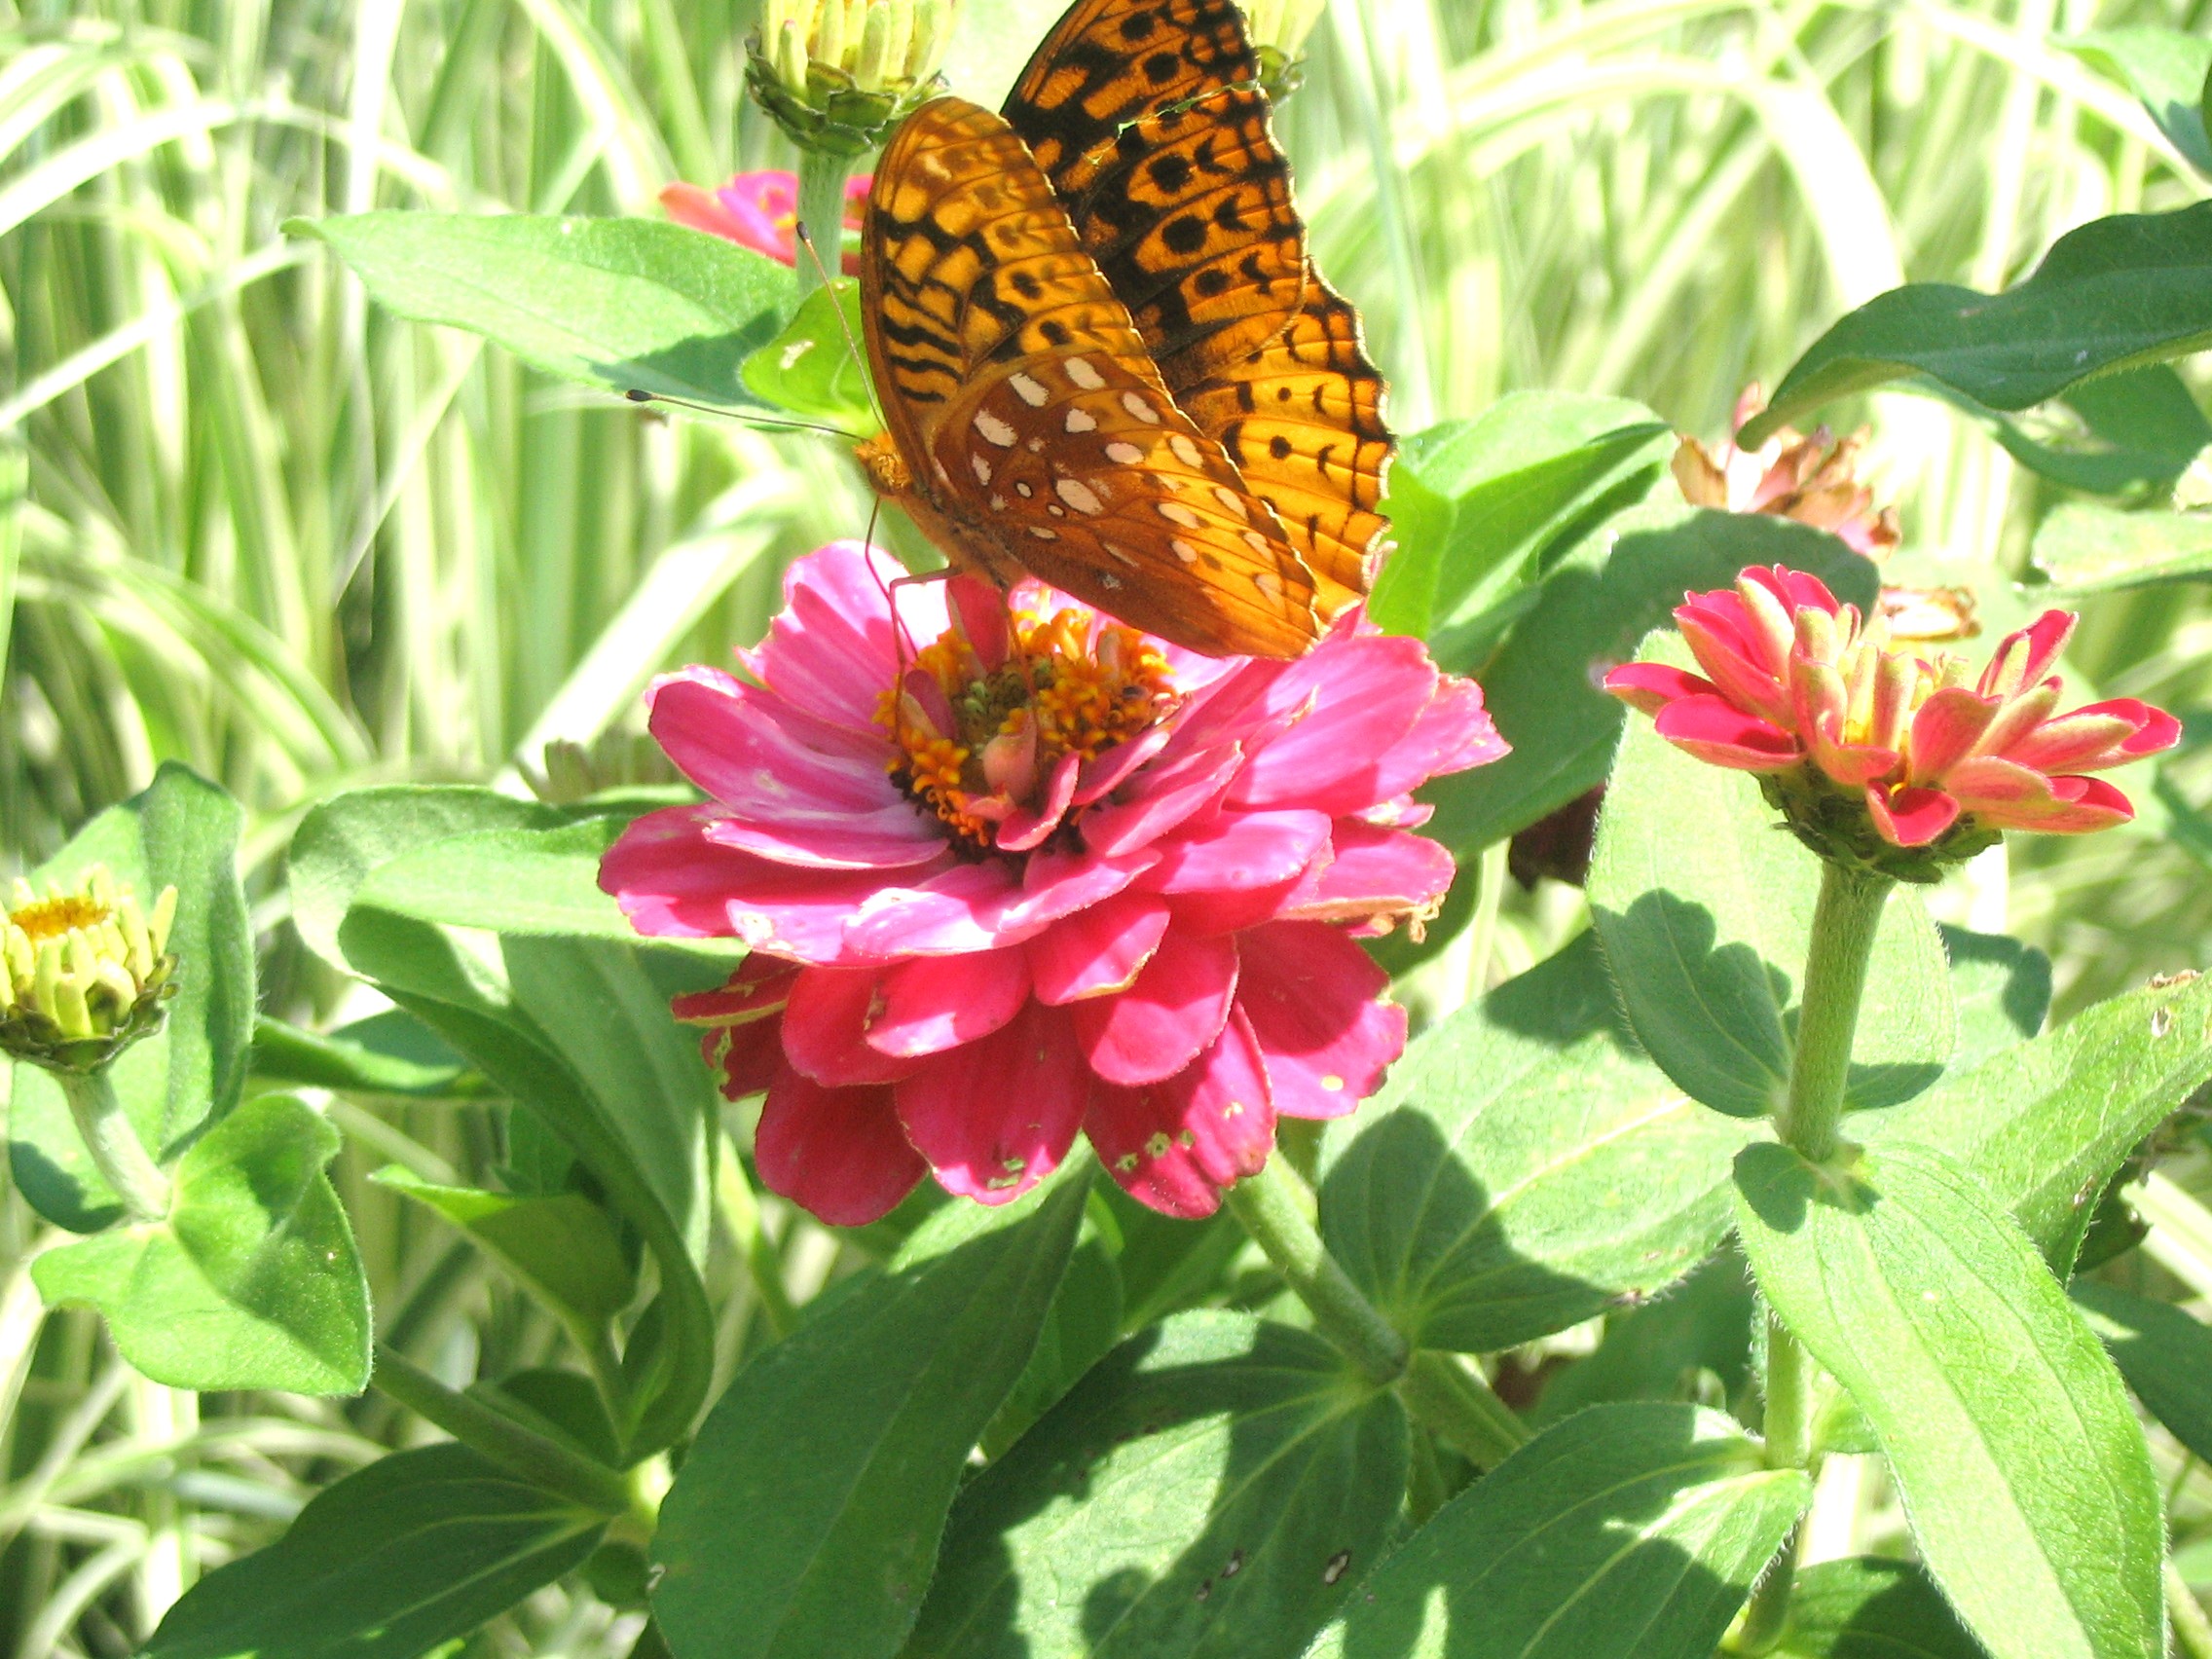 Butterfly On Flower (user submitted)